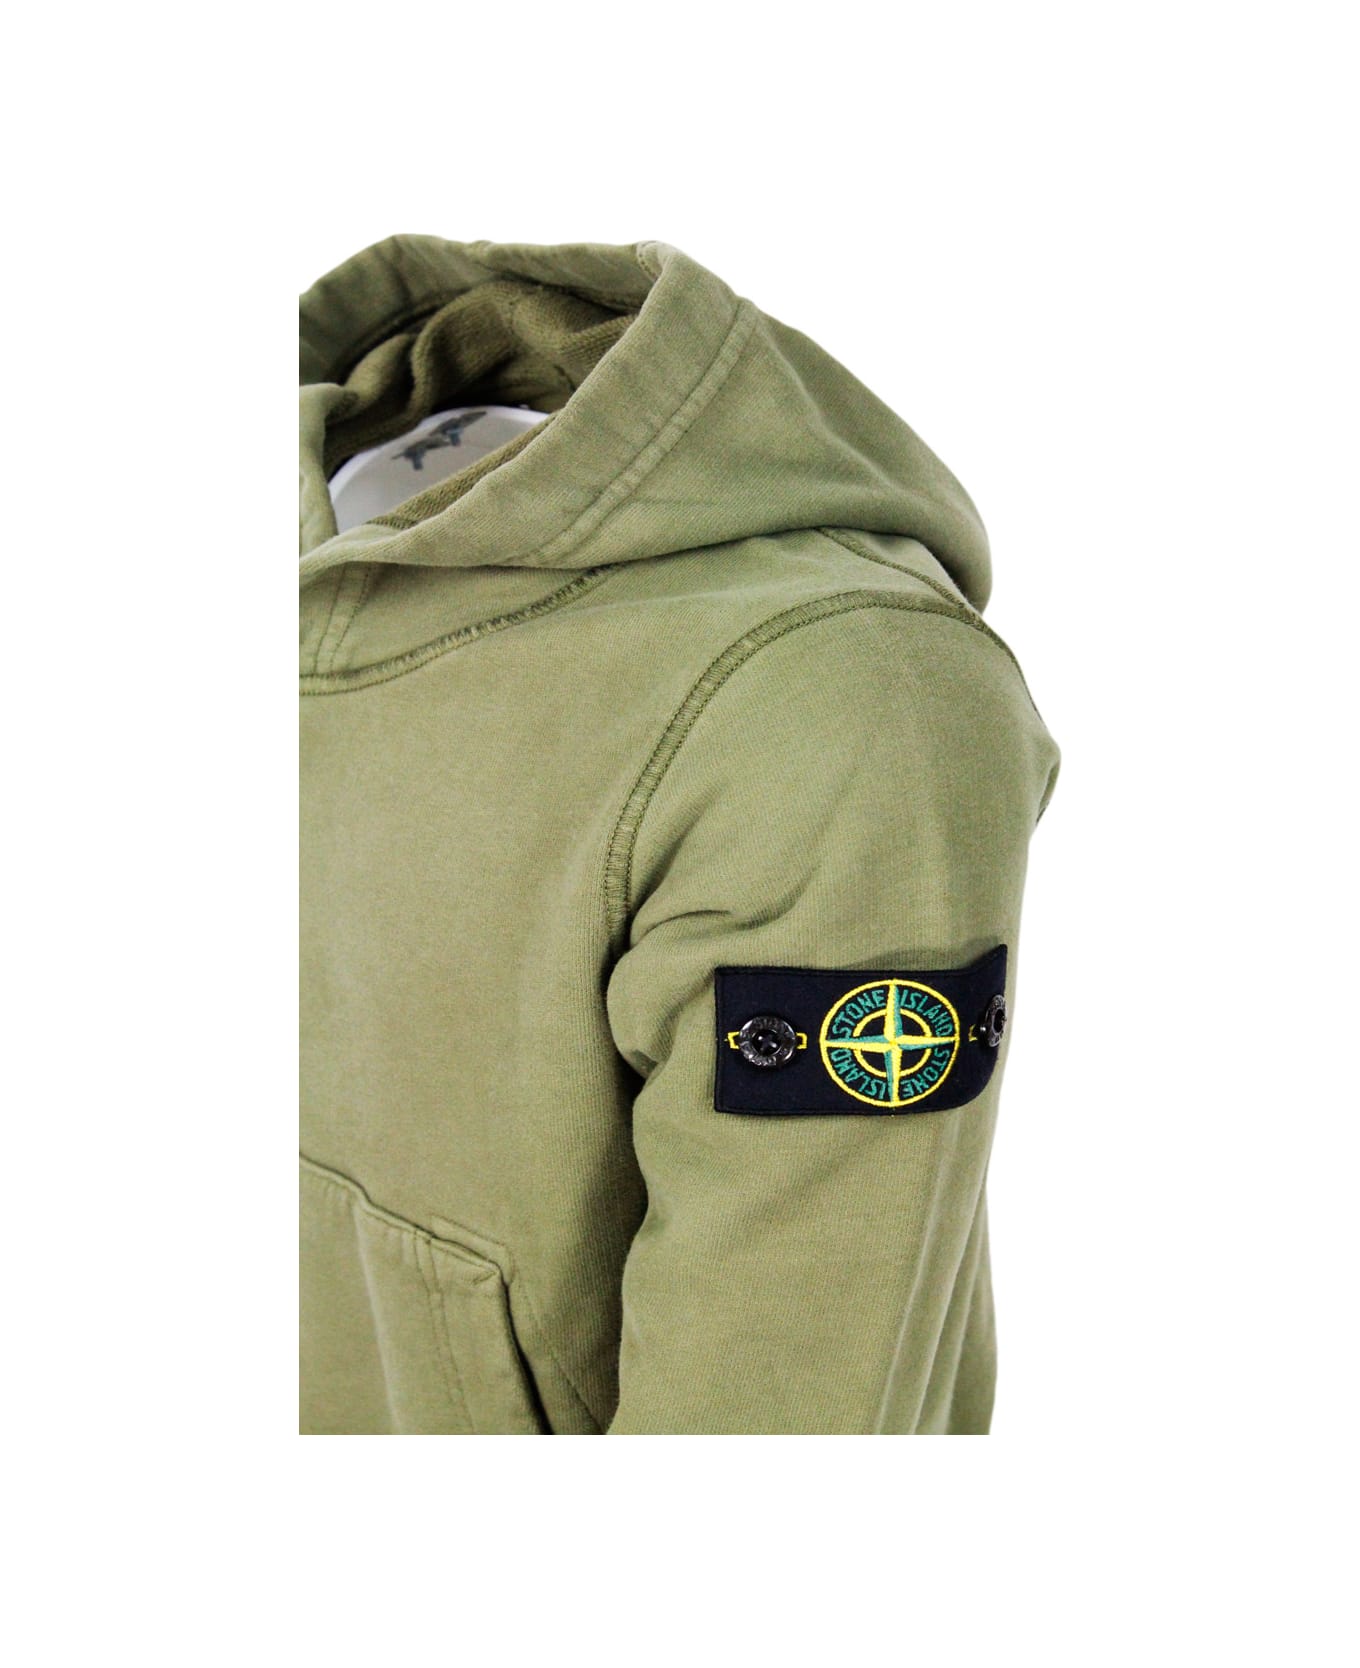 Stone Island Rocky Hooded Sweatshirt With Long Sleeves In Stretch Cotton With Badge On The Left Sleeve - Military